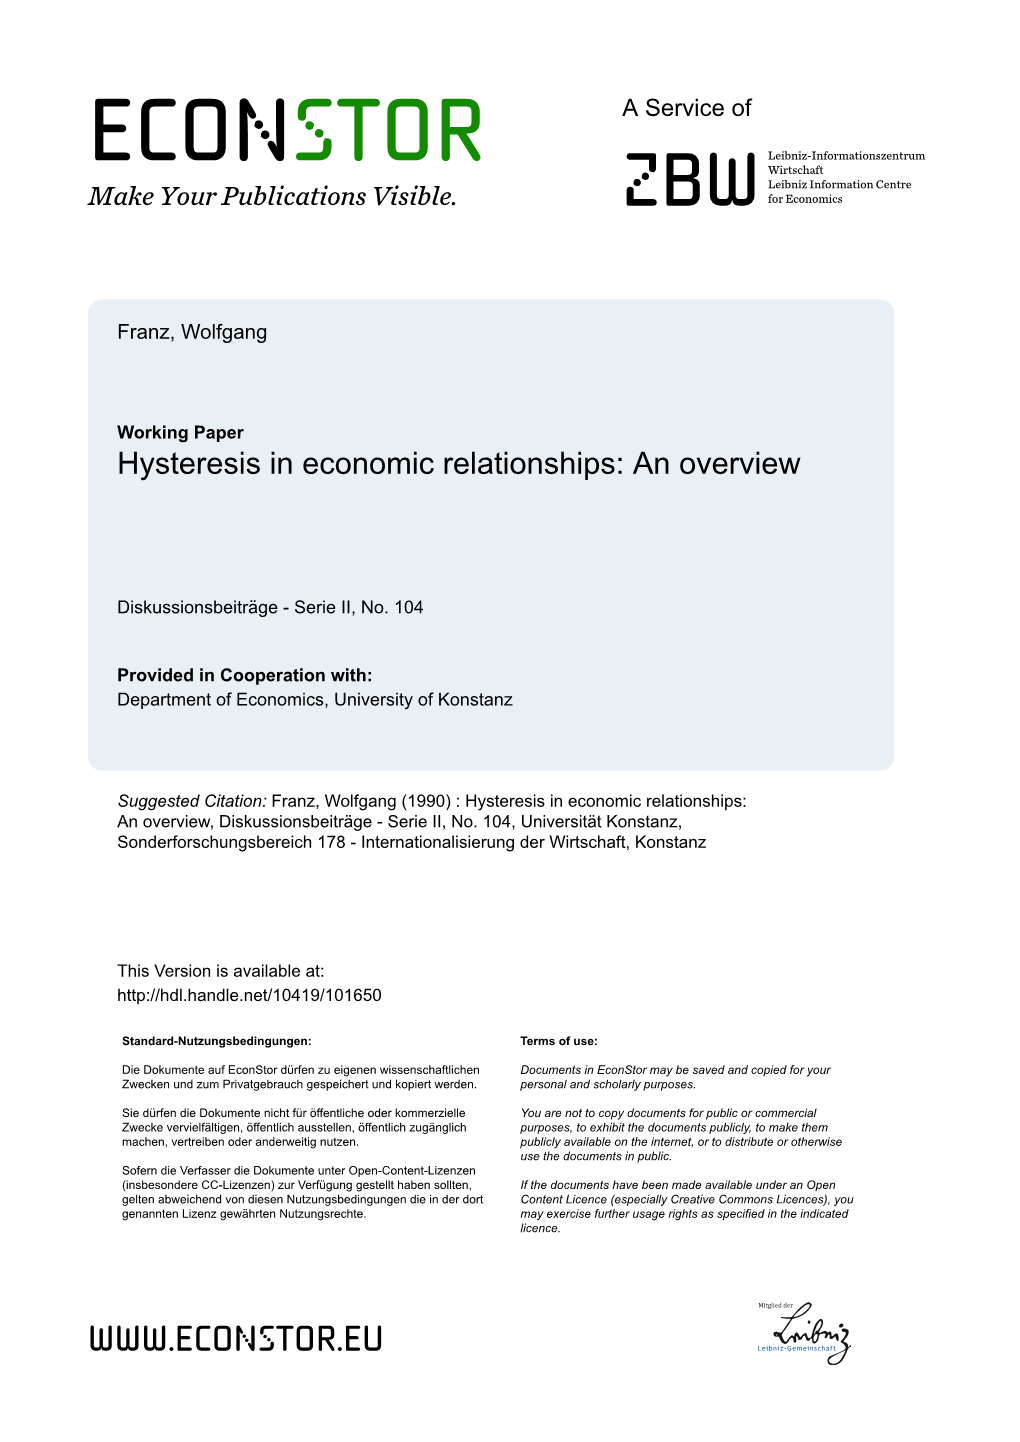 Hysteresis in Economic Relationships: an Overview